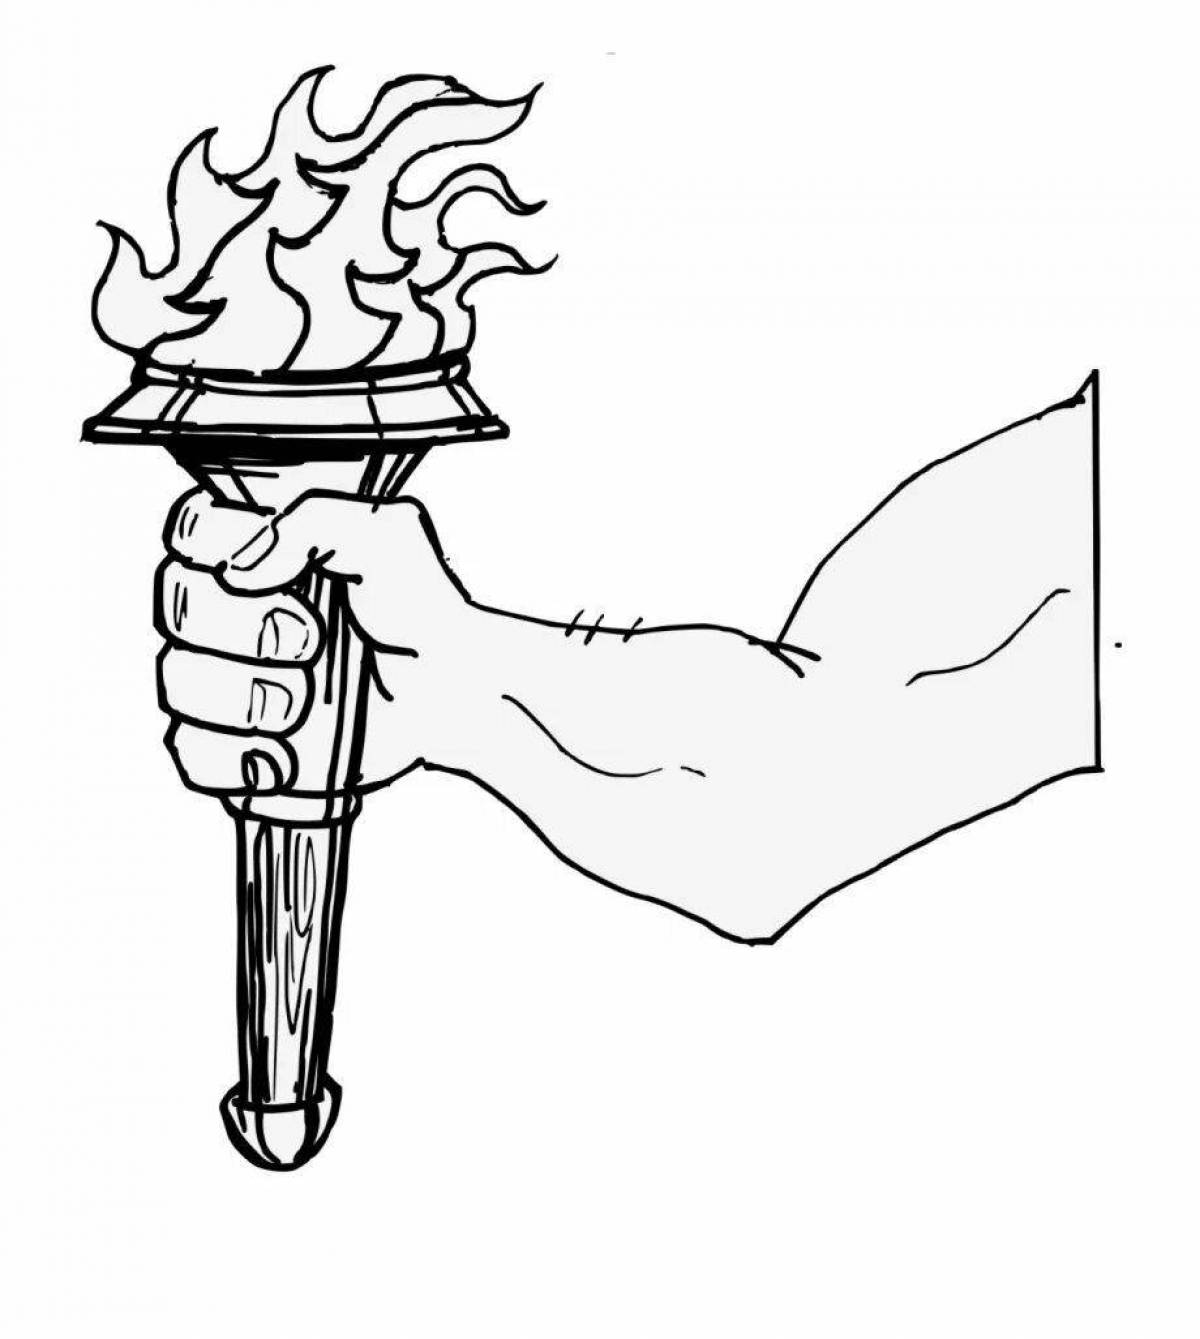 Great olympic torch coloring page